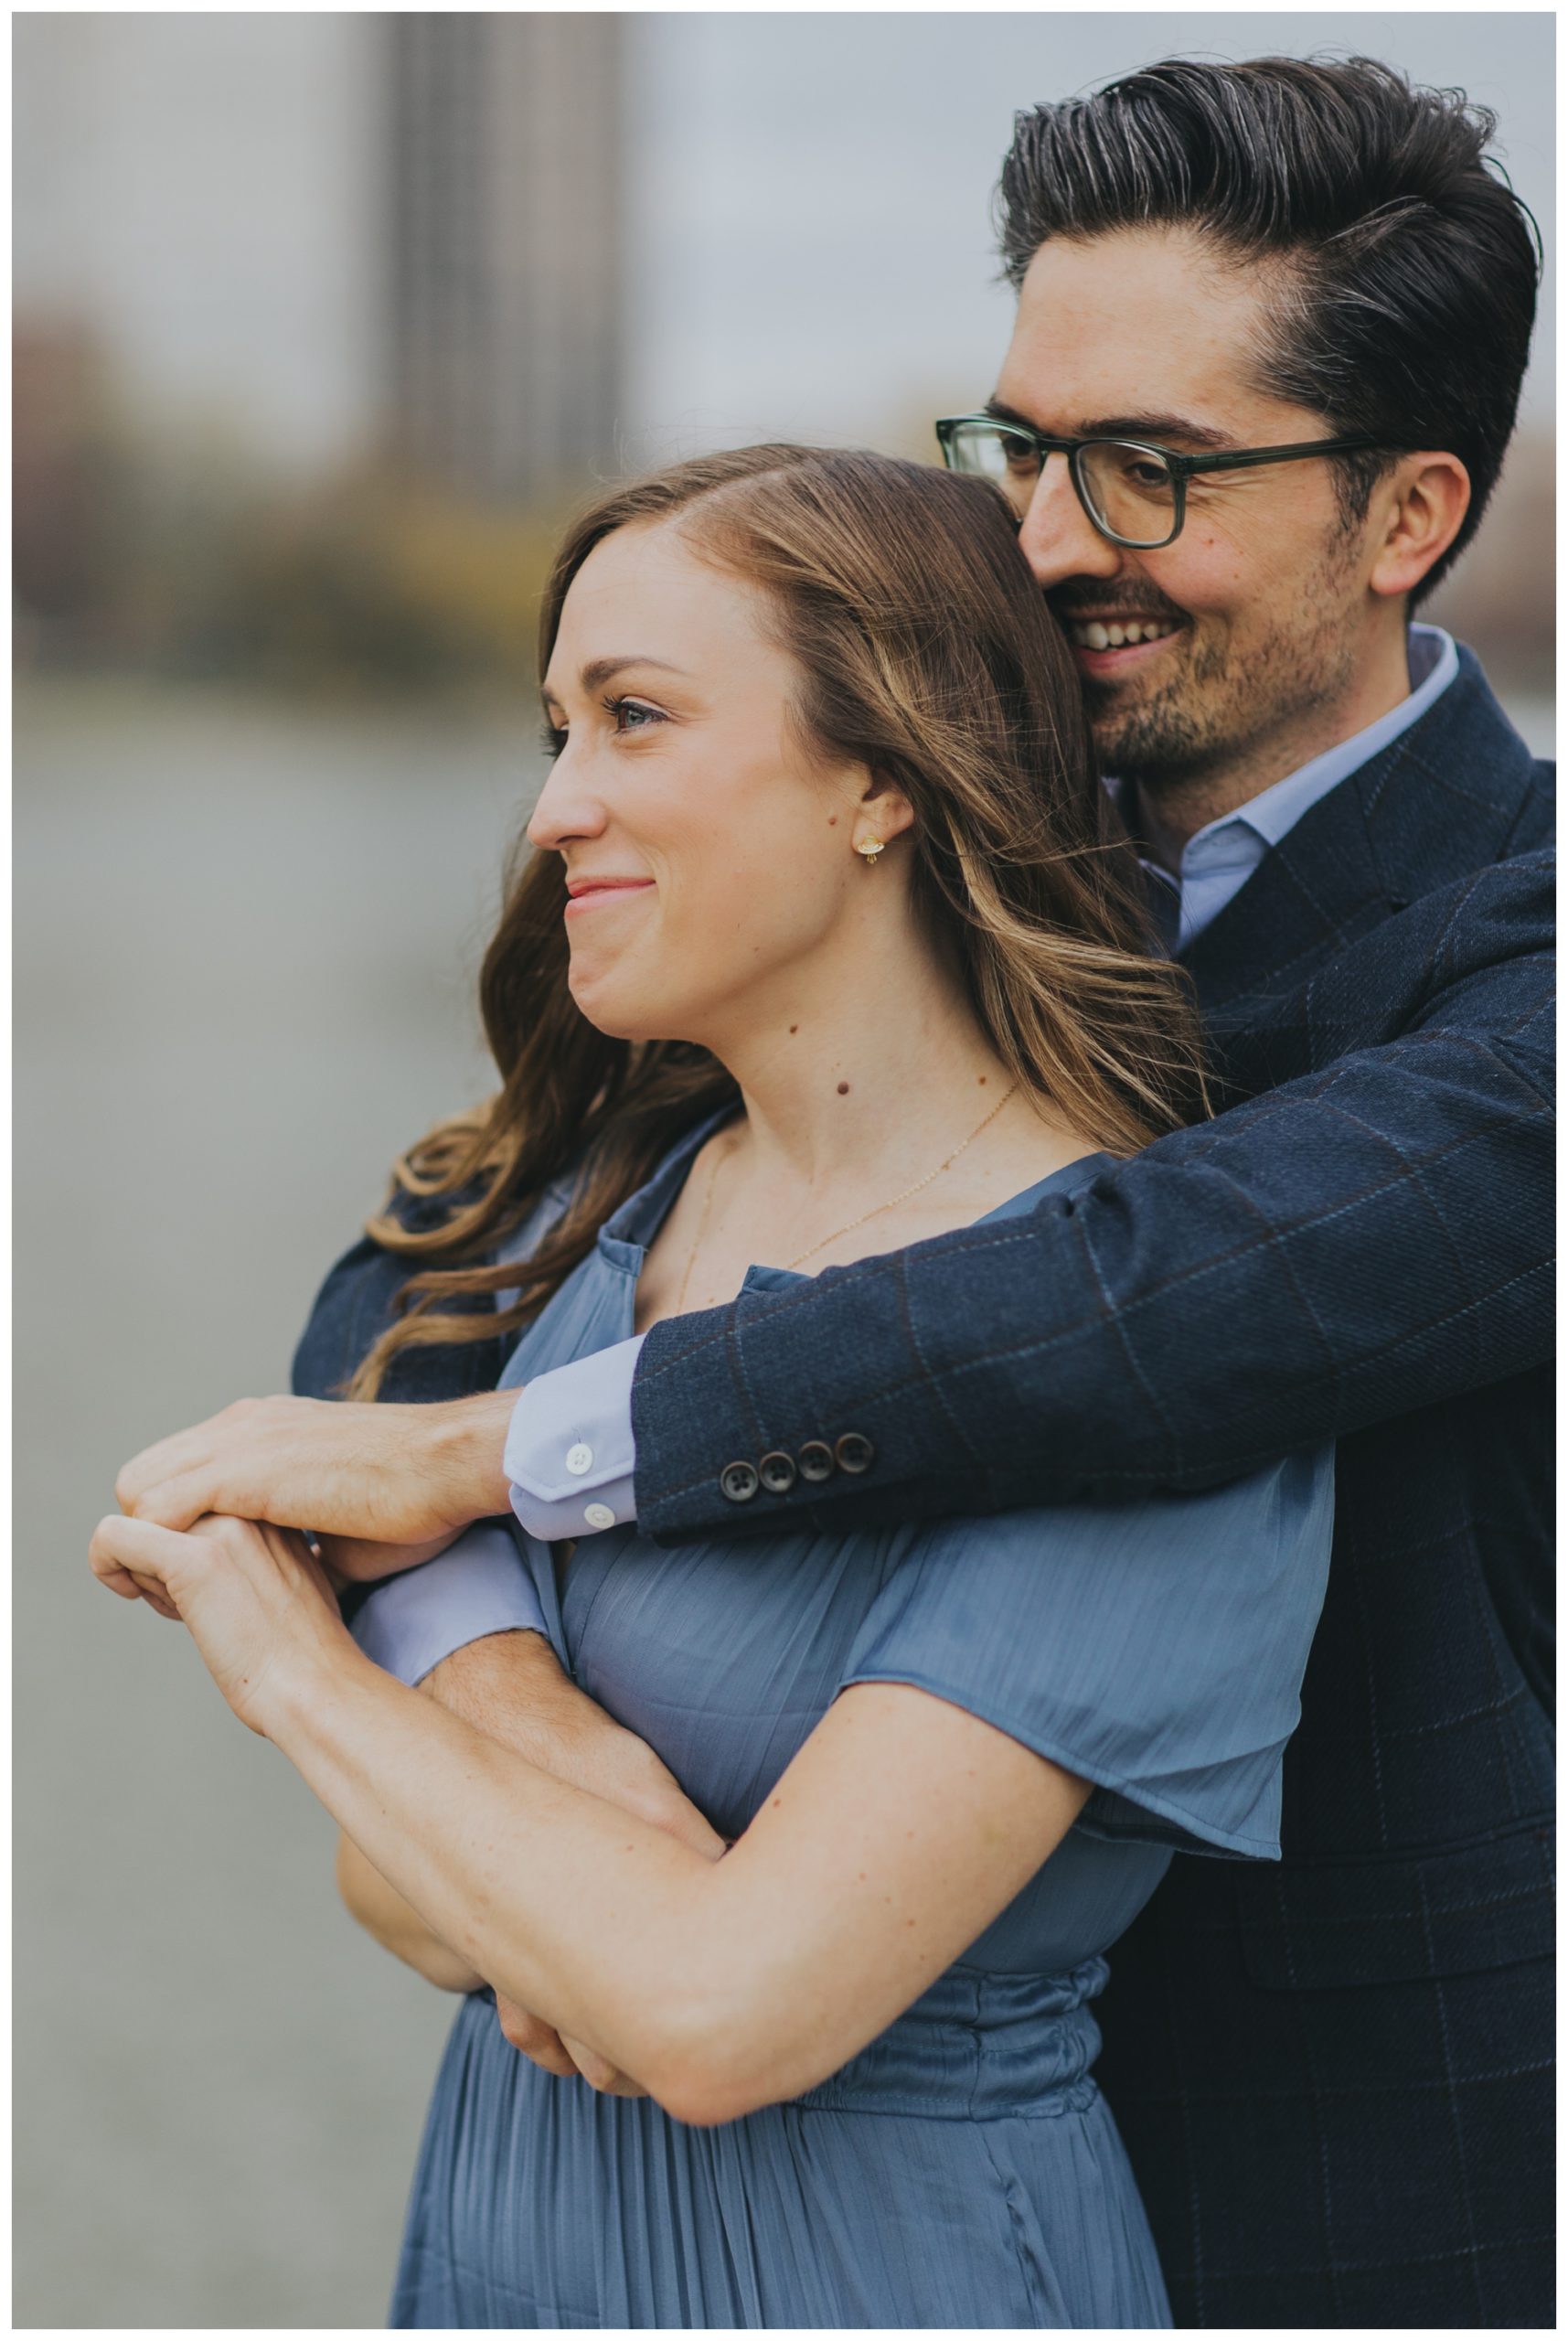 engagement photo outfit ideas